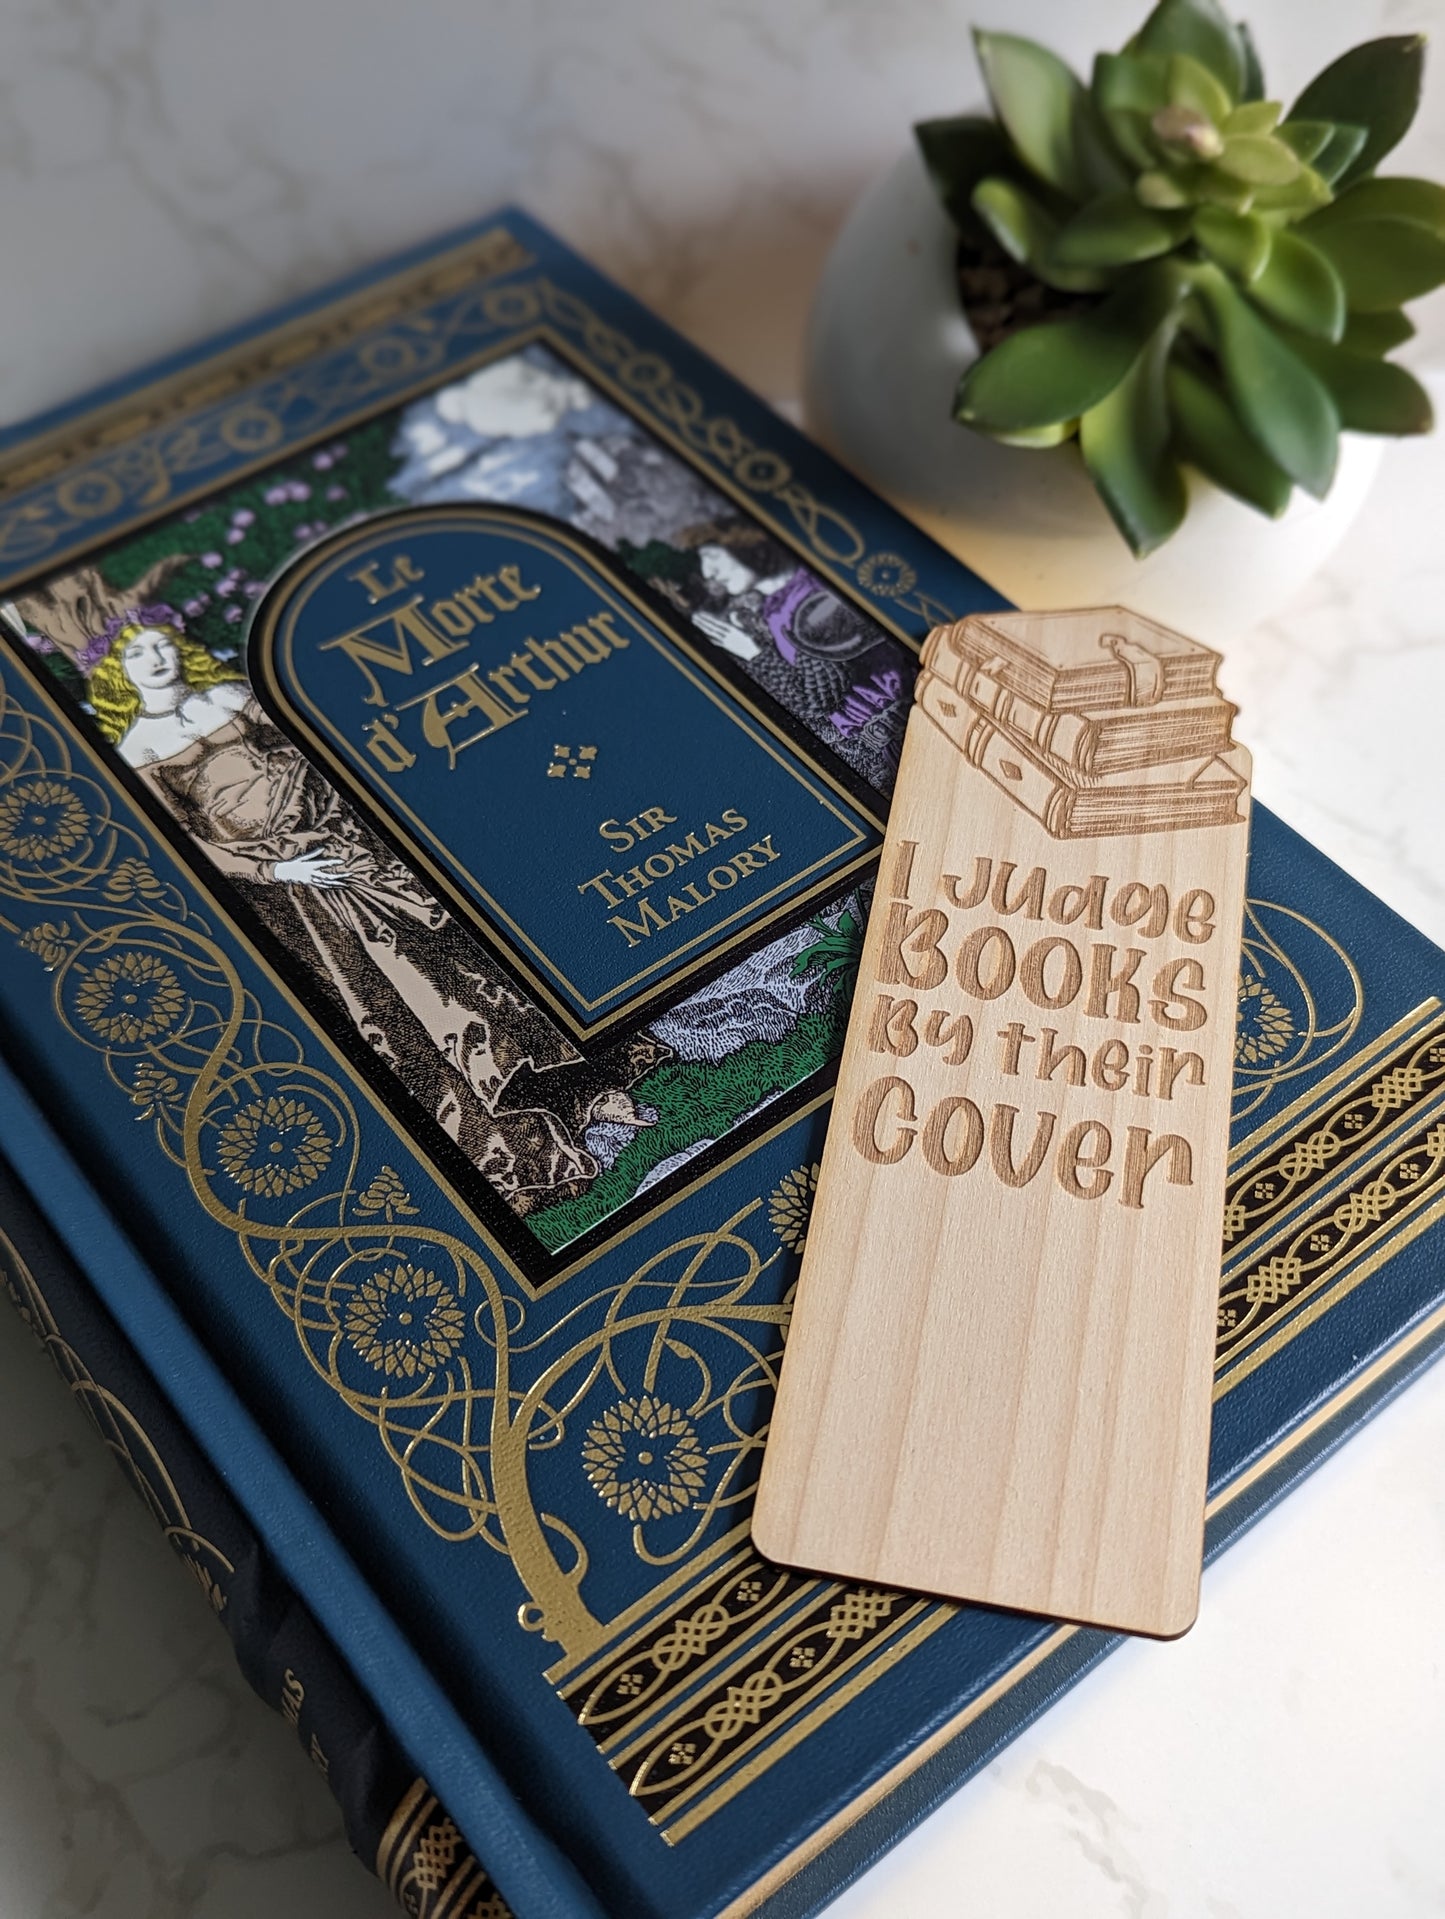 Wooden bookmark that says "I judge books by their cover."